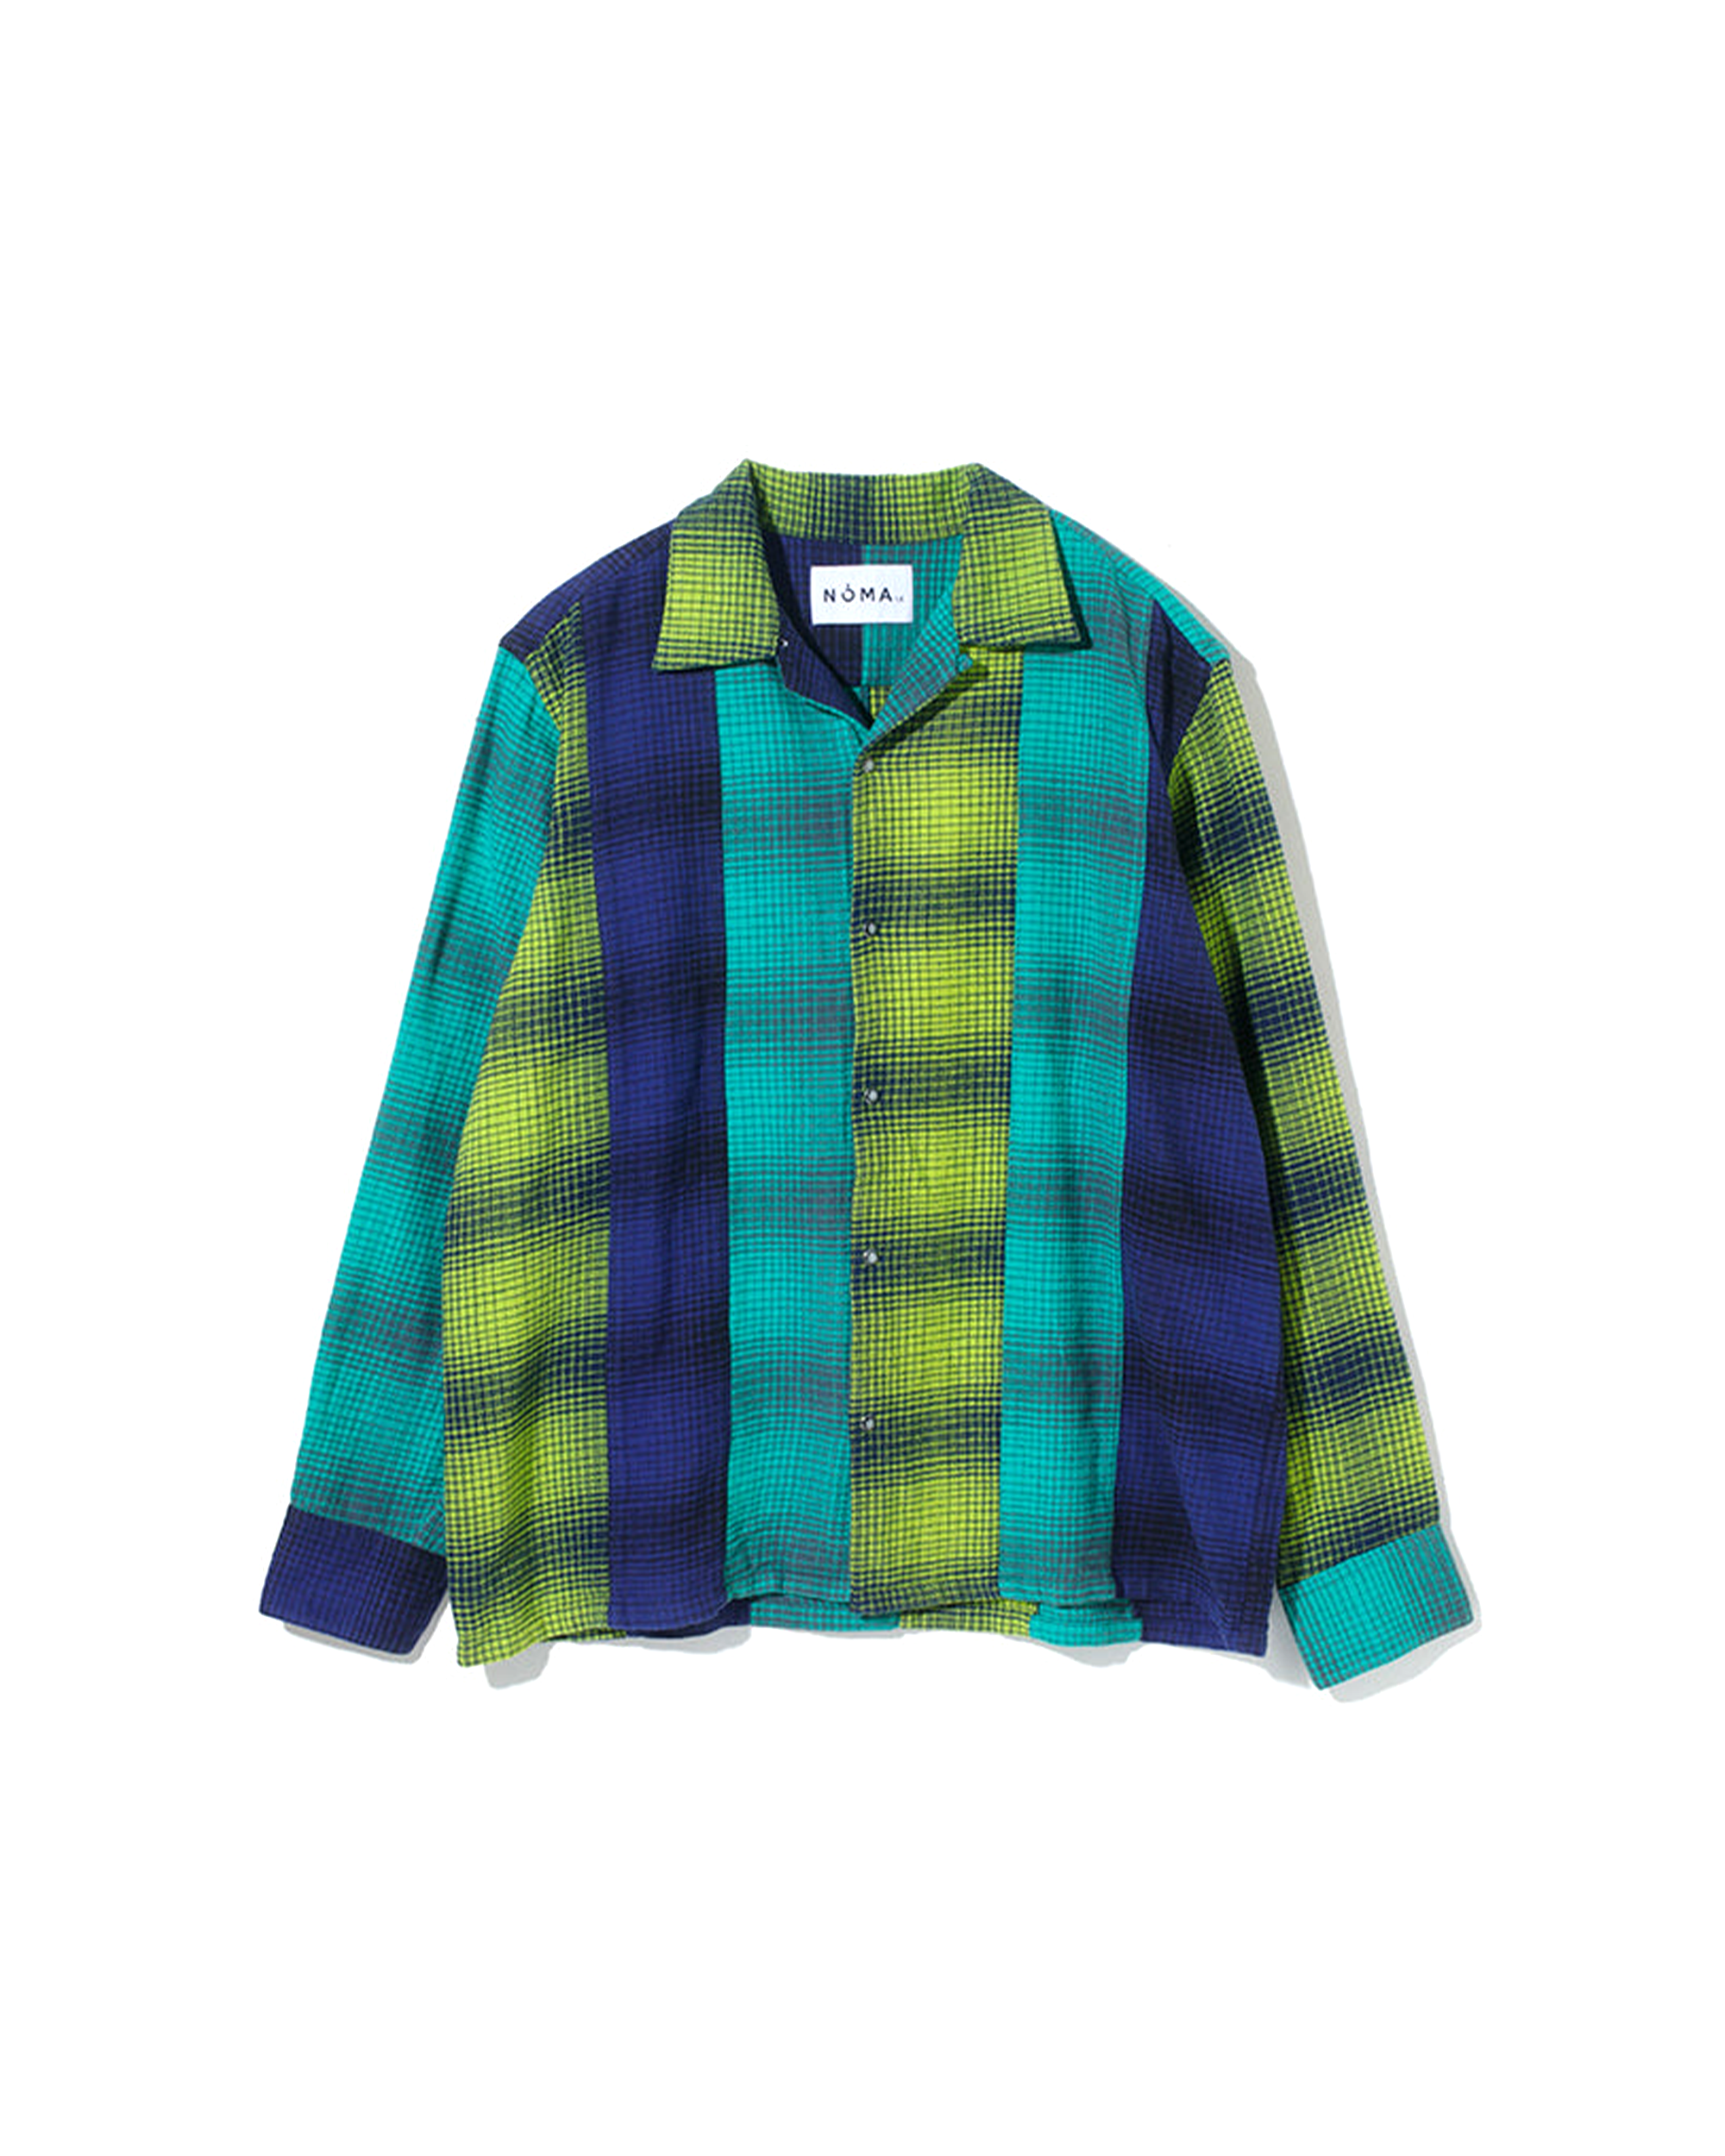 Ombre Plaid Patchwork Shirt - Lime / Navy / Emerald